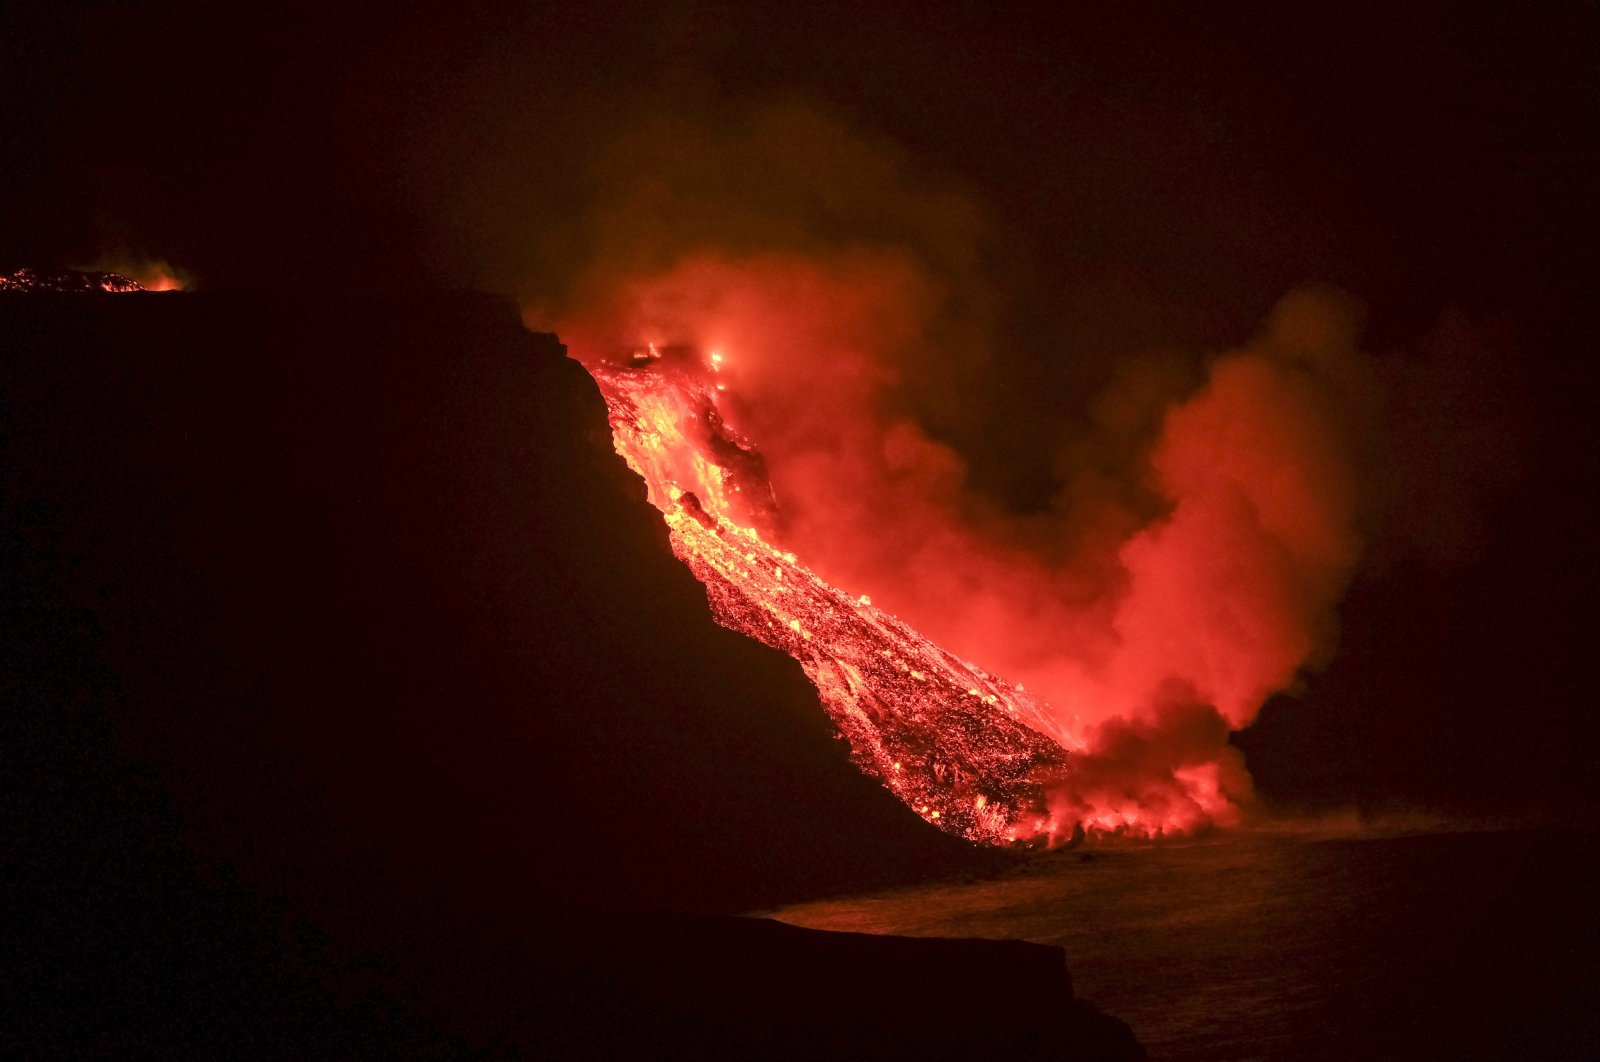 Lava flow from the Cumbre Vieja volcanic eruption in La Palma reaching the sea tonight in an area of cliffs next to Tazacortes coast in La Palma, Canary Islands, Sept. 28, 2021. (EPA Photo)